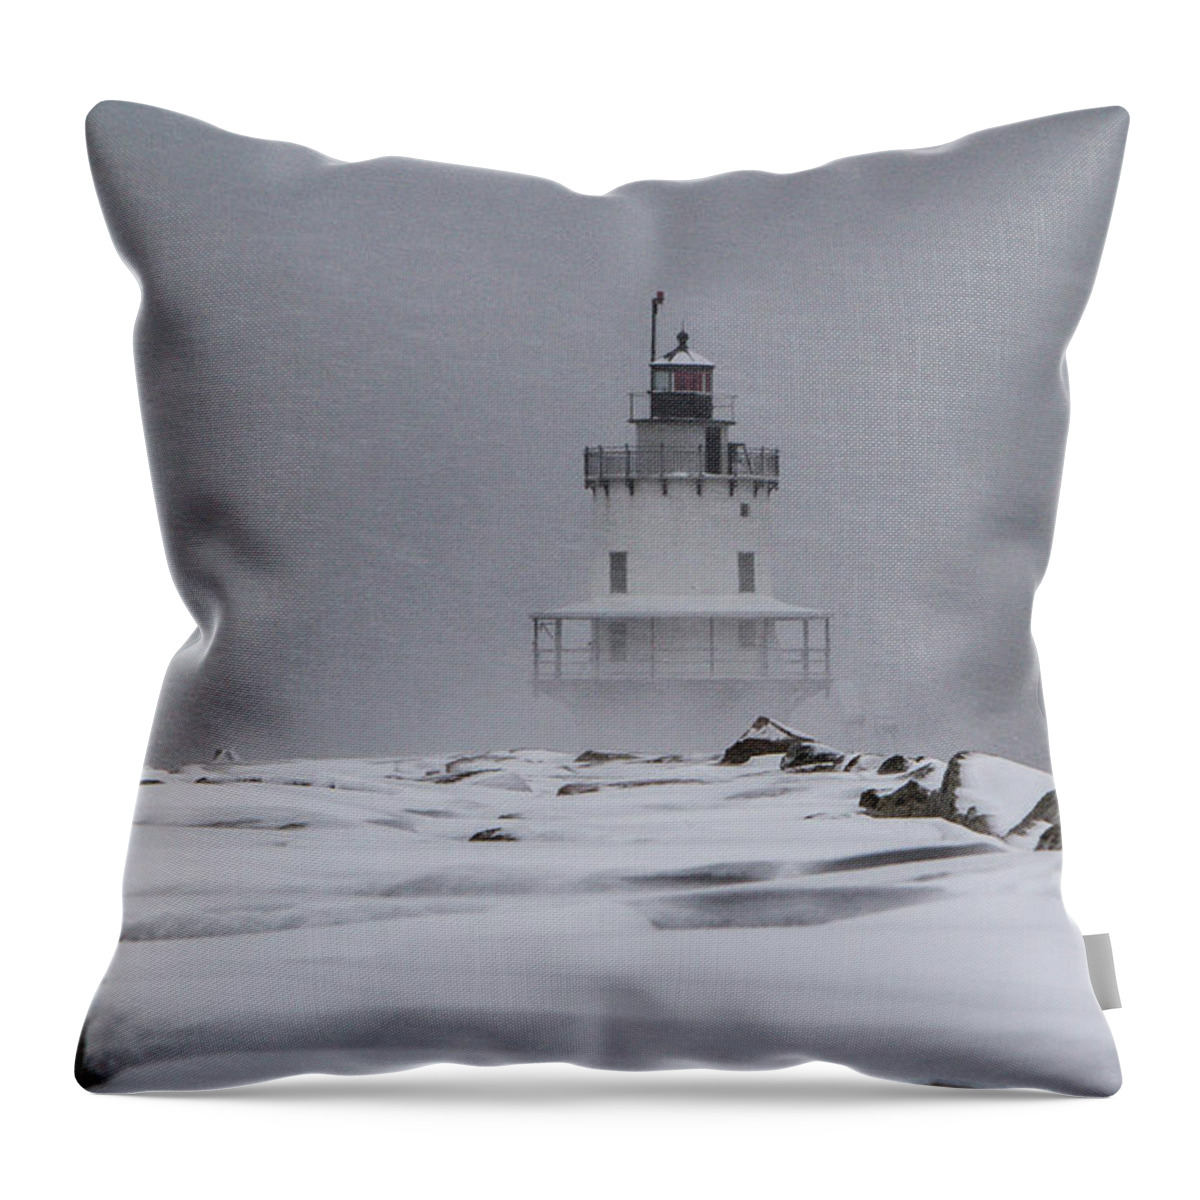 Sprint Point Throw Pillow featuring the photograph Spring Point Ledge Lighthouse Blizzard by Darryl Hendricks